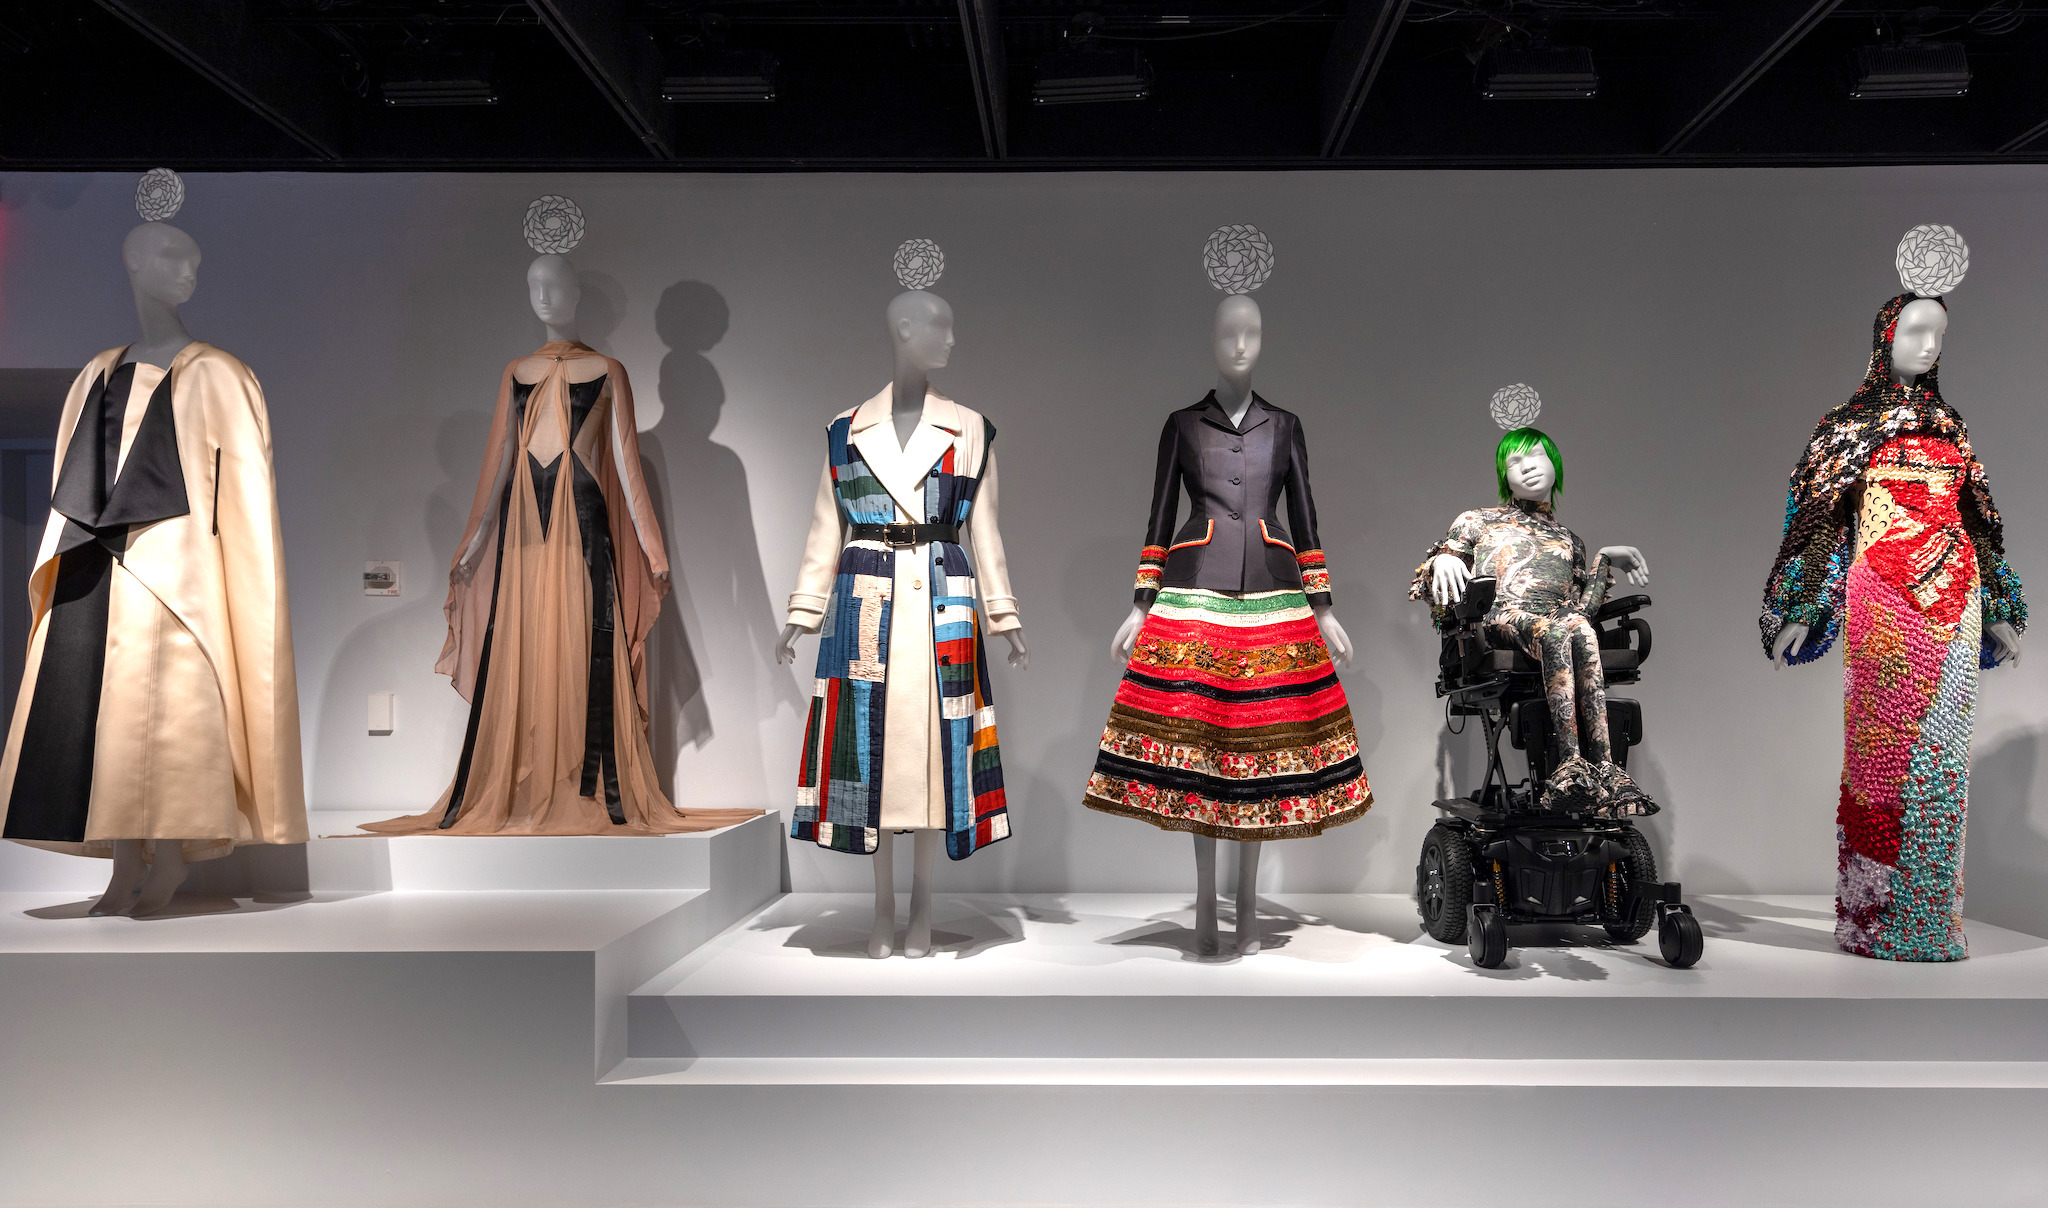 A first look at The Metropolitan Museum's fabulous, feminist